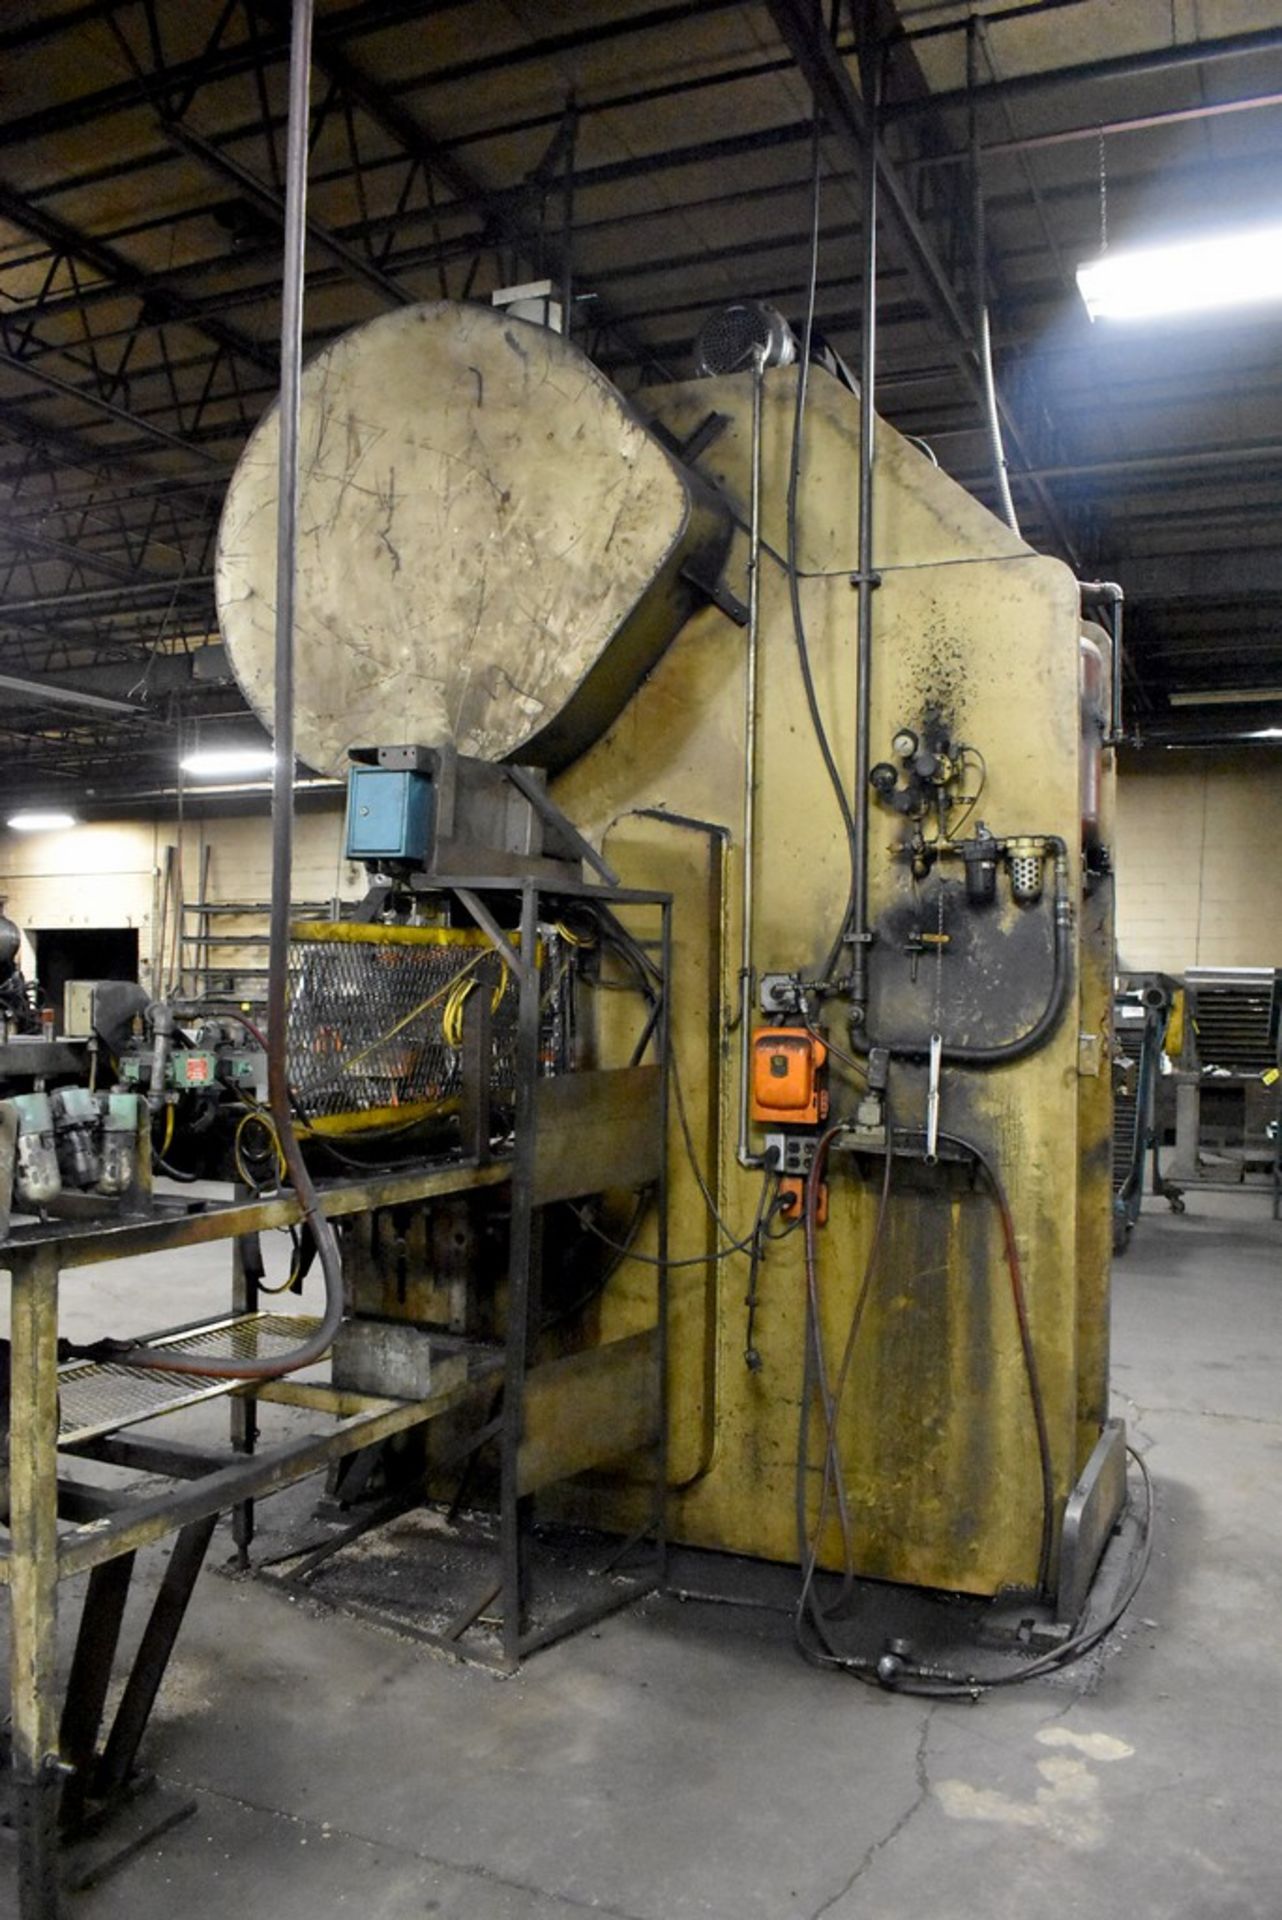 Rousselle Model G1-200 Back Geared Gap Frame Punch Press, 200 Ton - 8" Stroke - 32" x 50" Bed Area - - Image 11 of 11